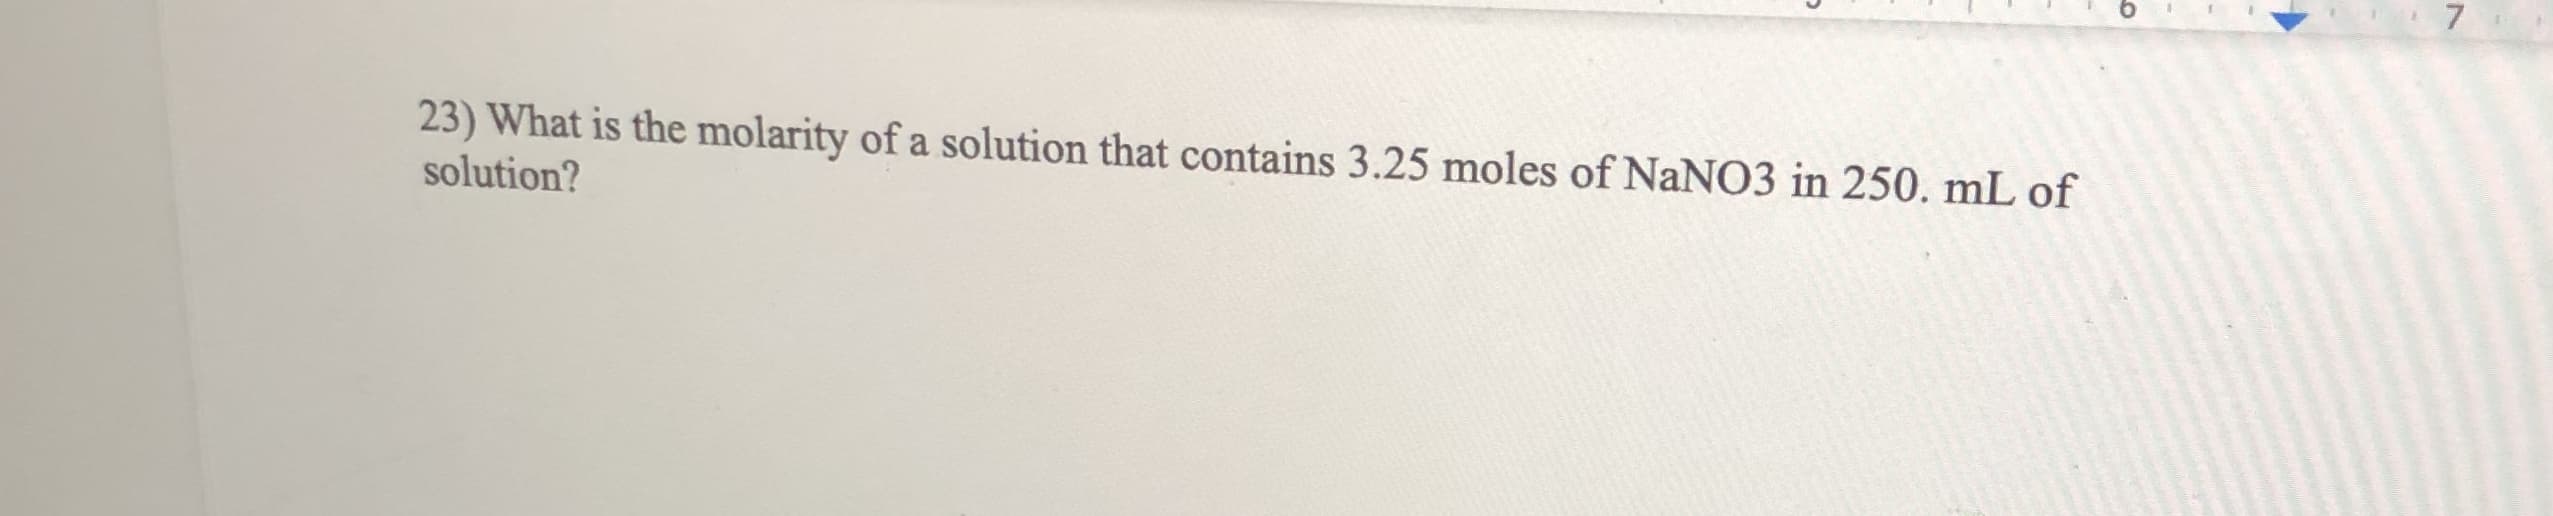 23) What is the molarity of a solution that contains 3.25 moles of NaNO3 in 250. mL of
solution?
